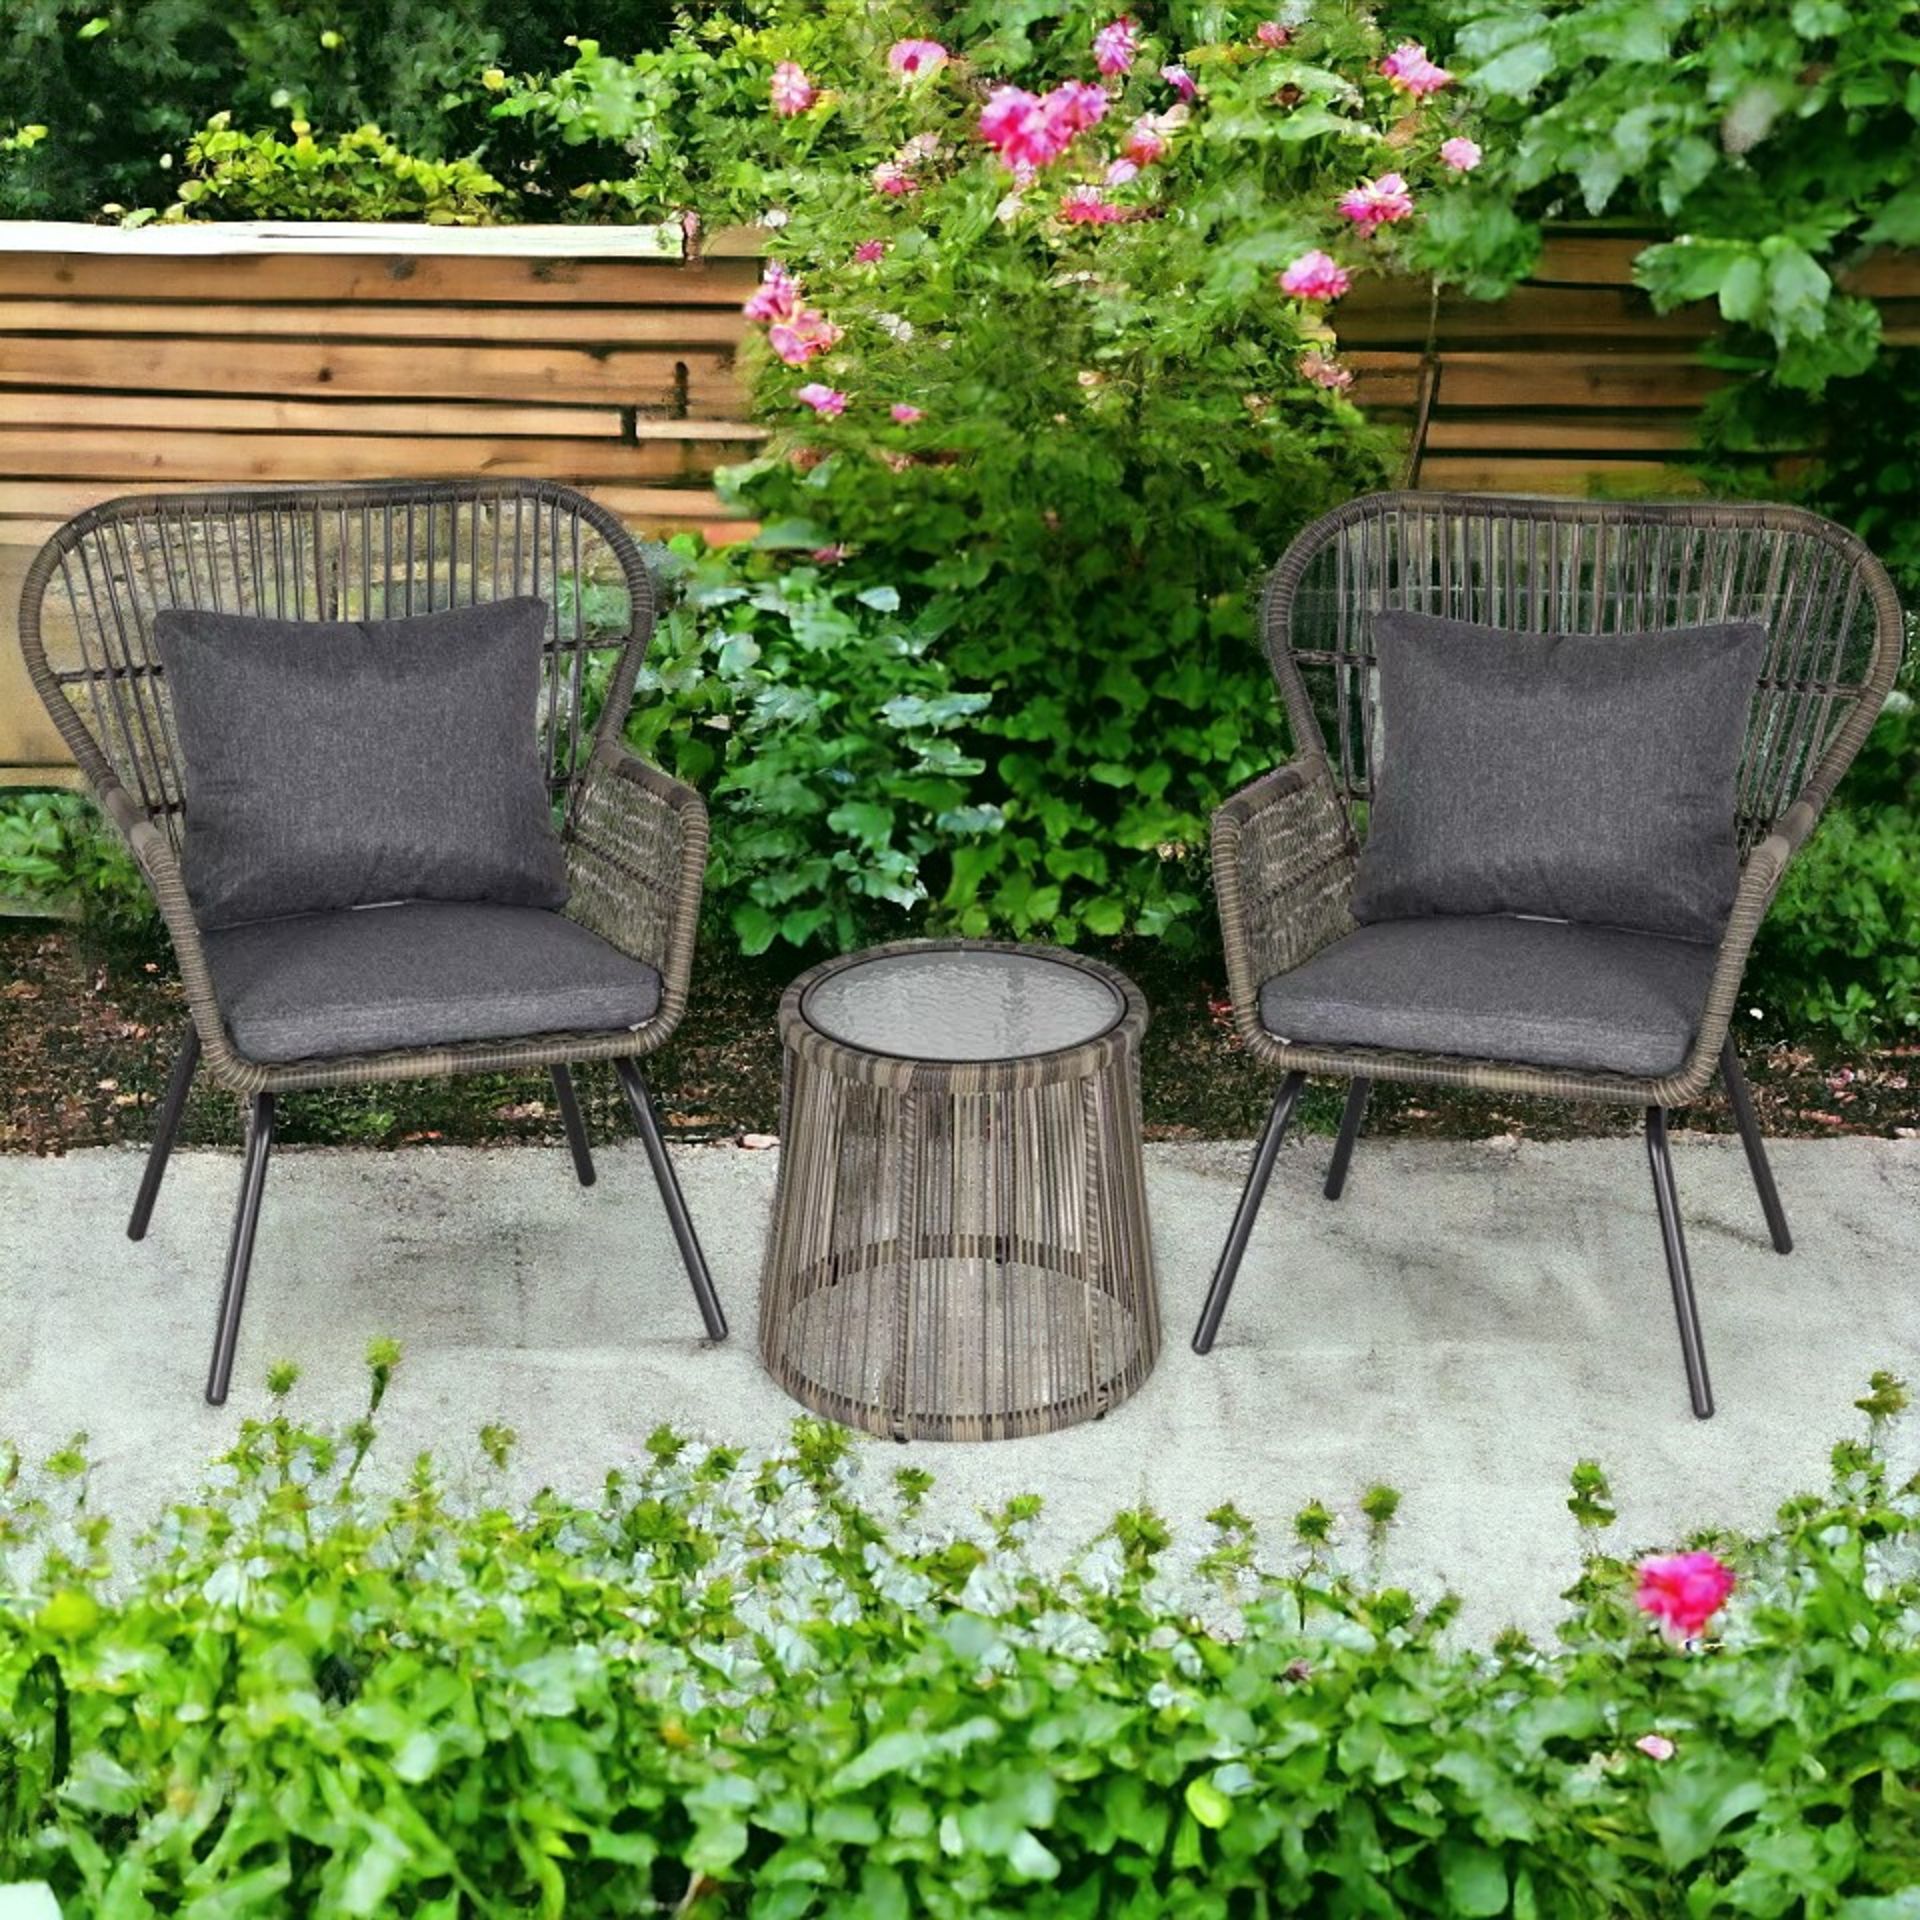 FREE DELIVERY- BRAND NEW 3 PCS WEBBED PE RATTAN OUTDOOR PATIO SET W/ CUSHIONS STEEL FRAME GREY